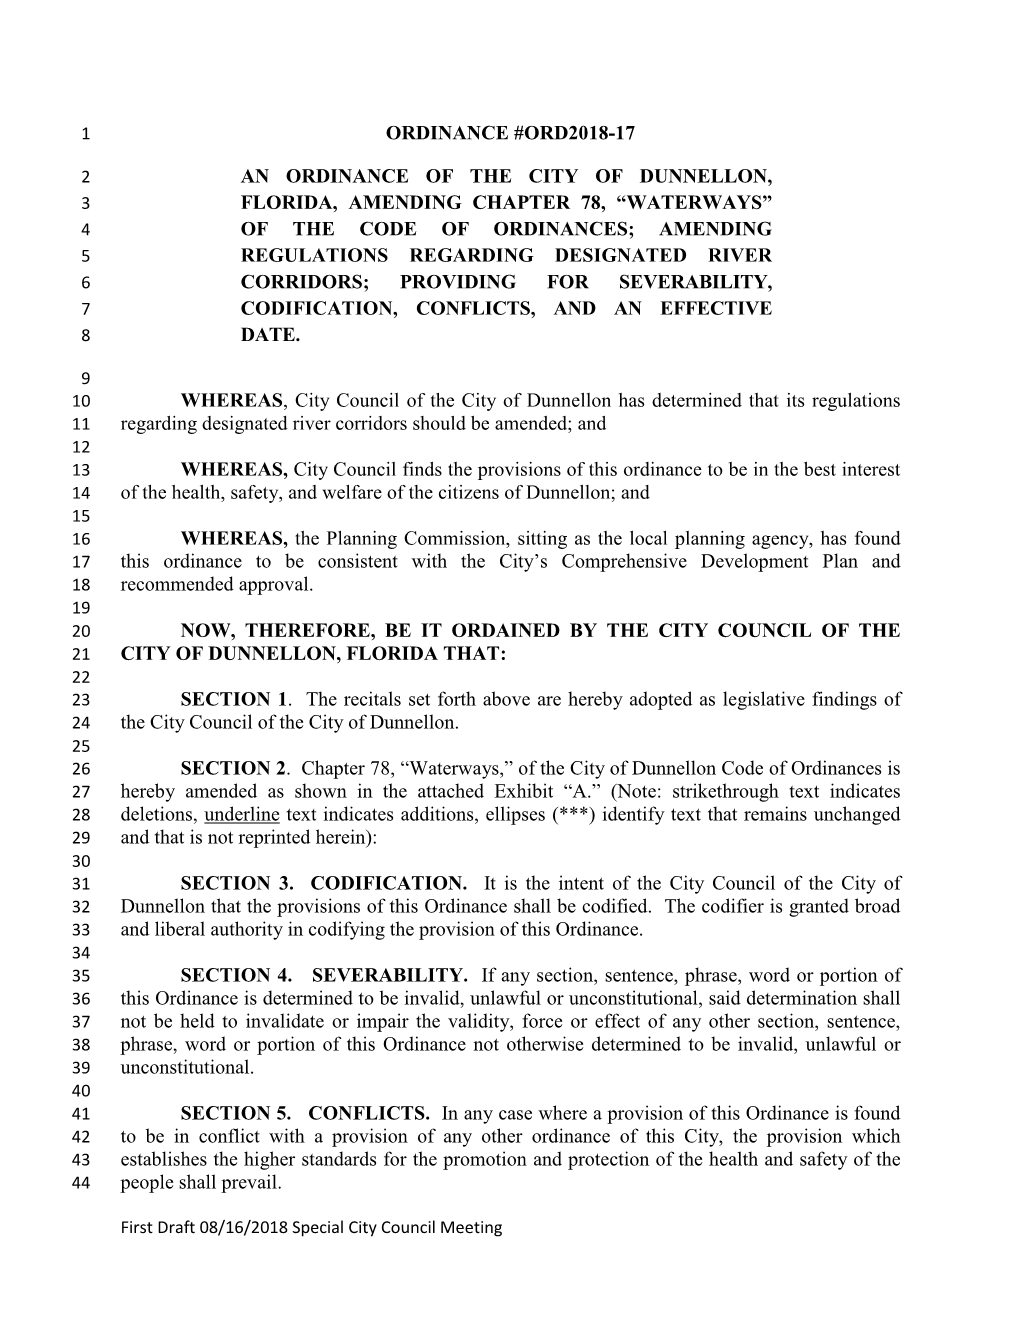 Ordinance #Ord2018-17 an Ordinance of the City Of